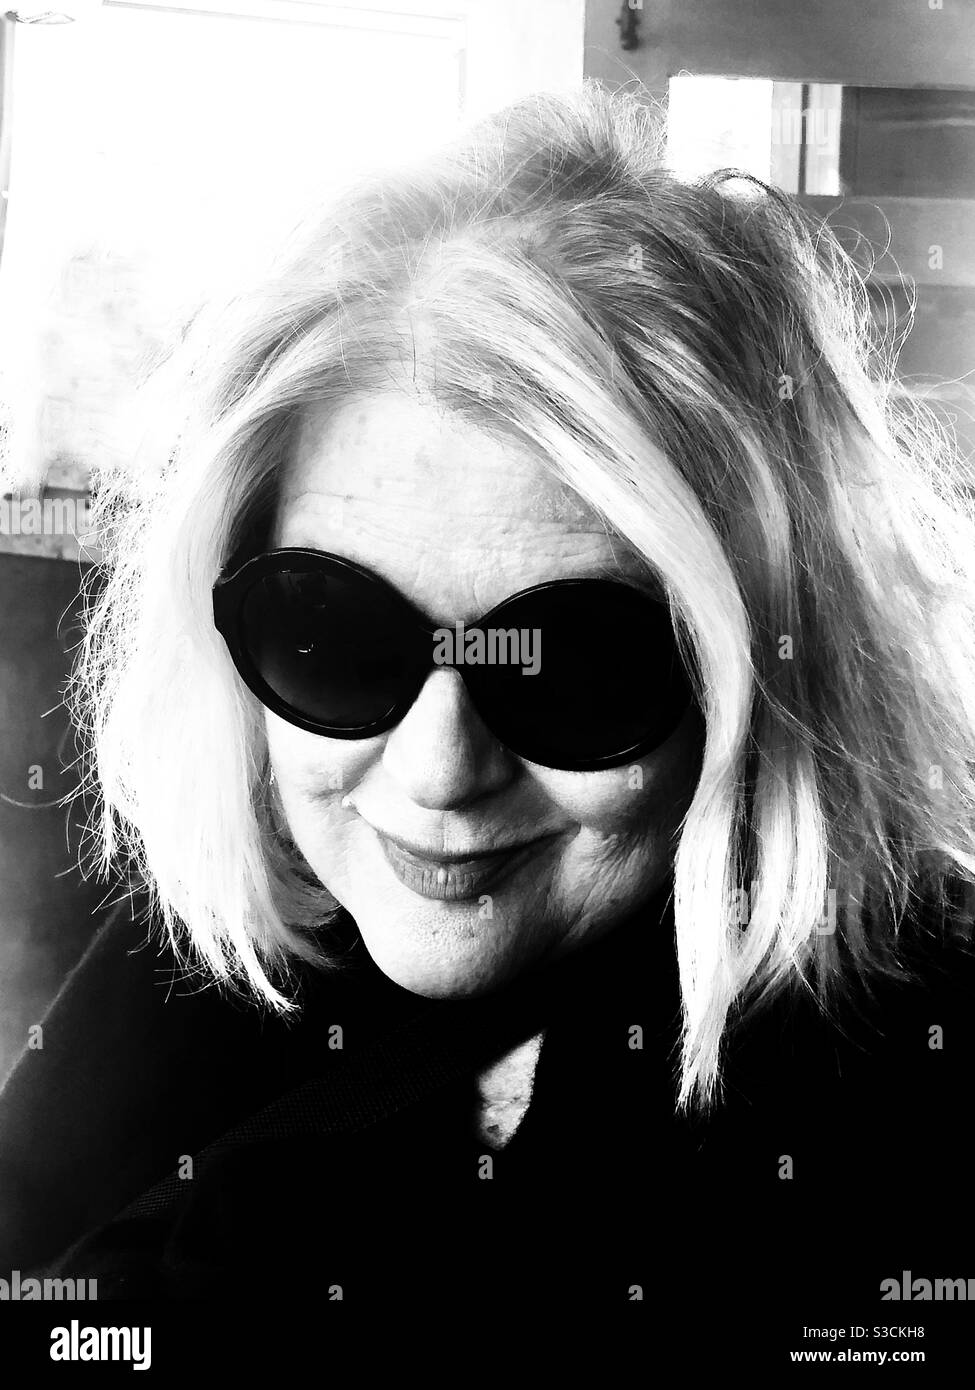 Who is the beautiful mysterious blonde woman With an a enigmatic smile hiding behind sunglasses in This vintage looking black-and-white photo? Stock Photo